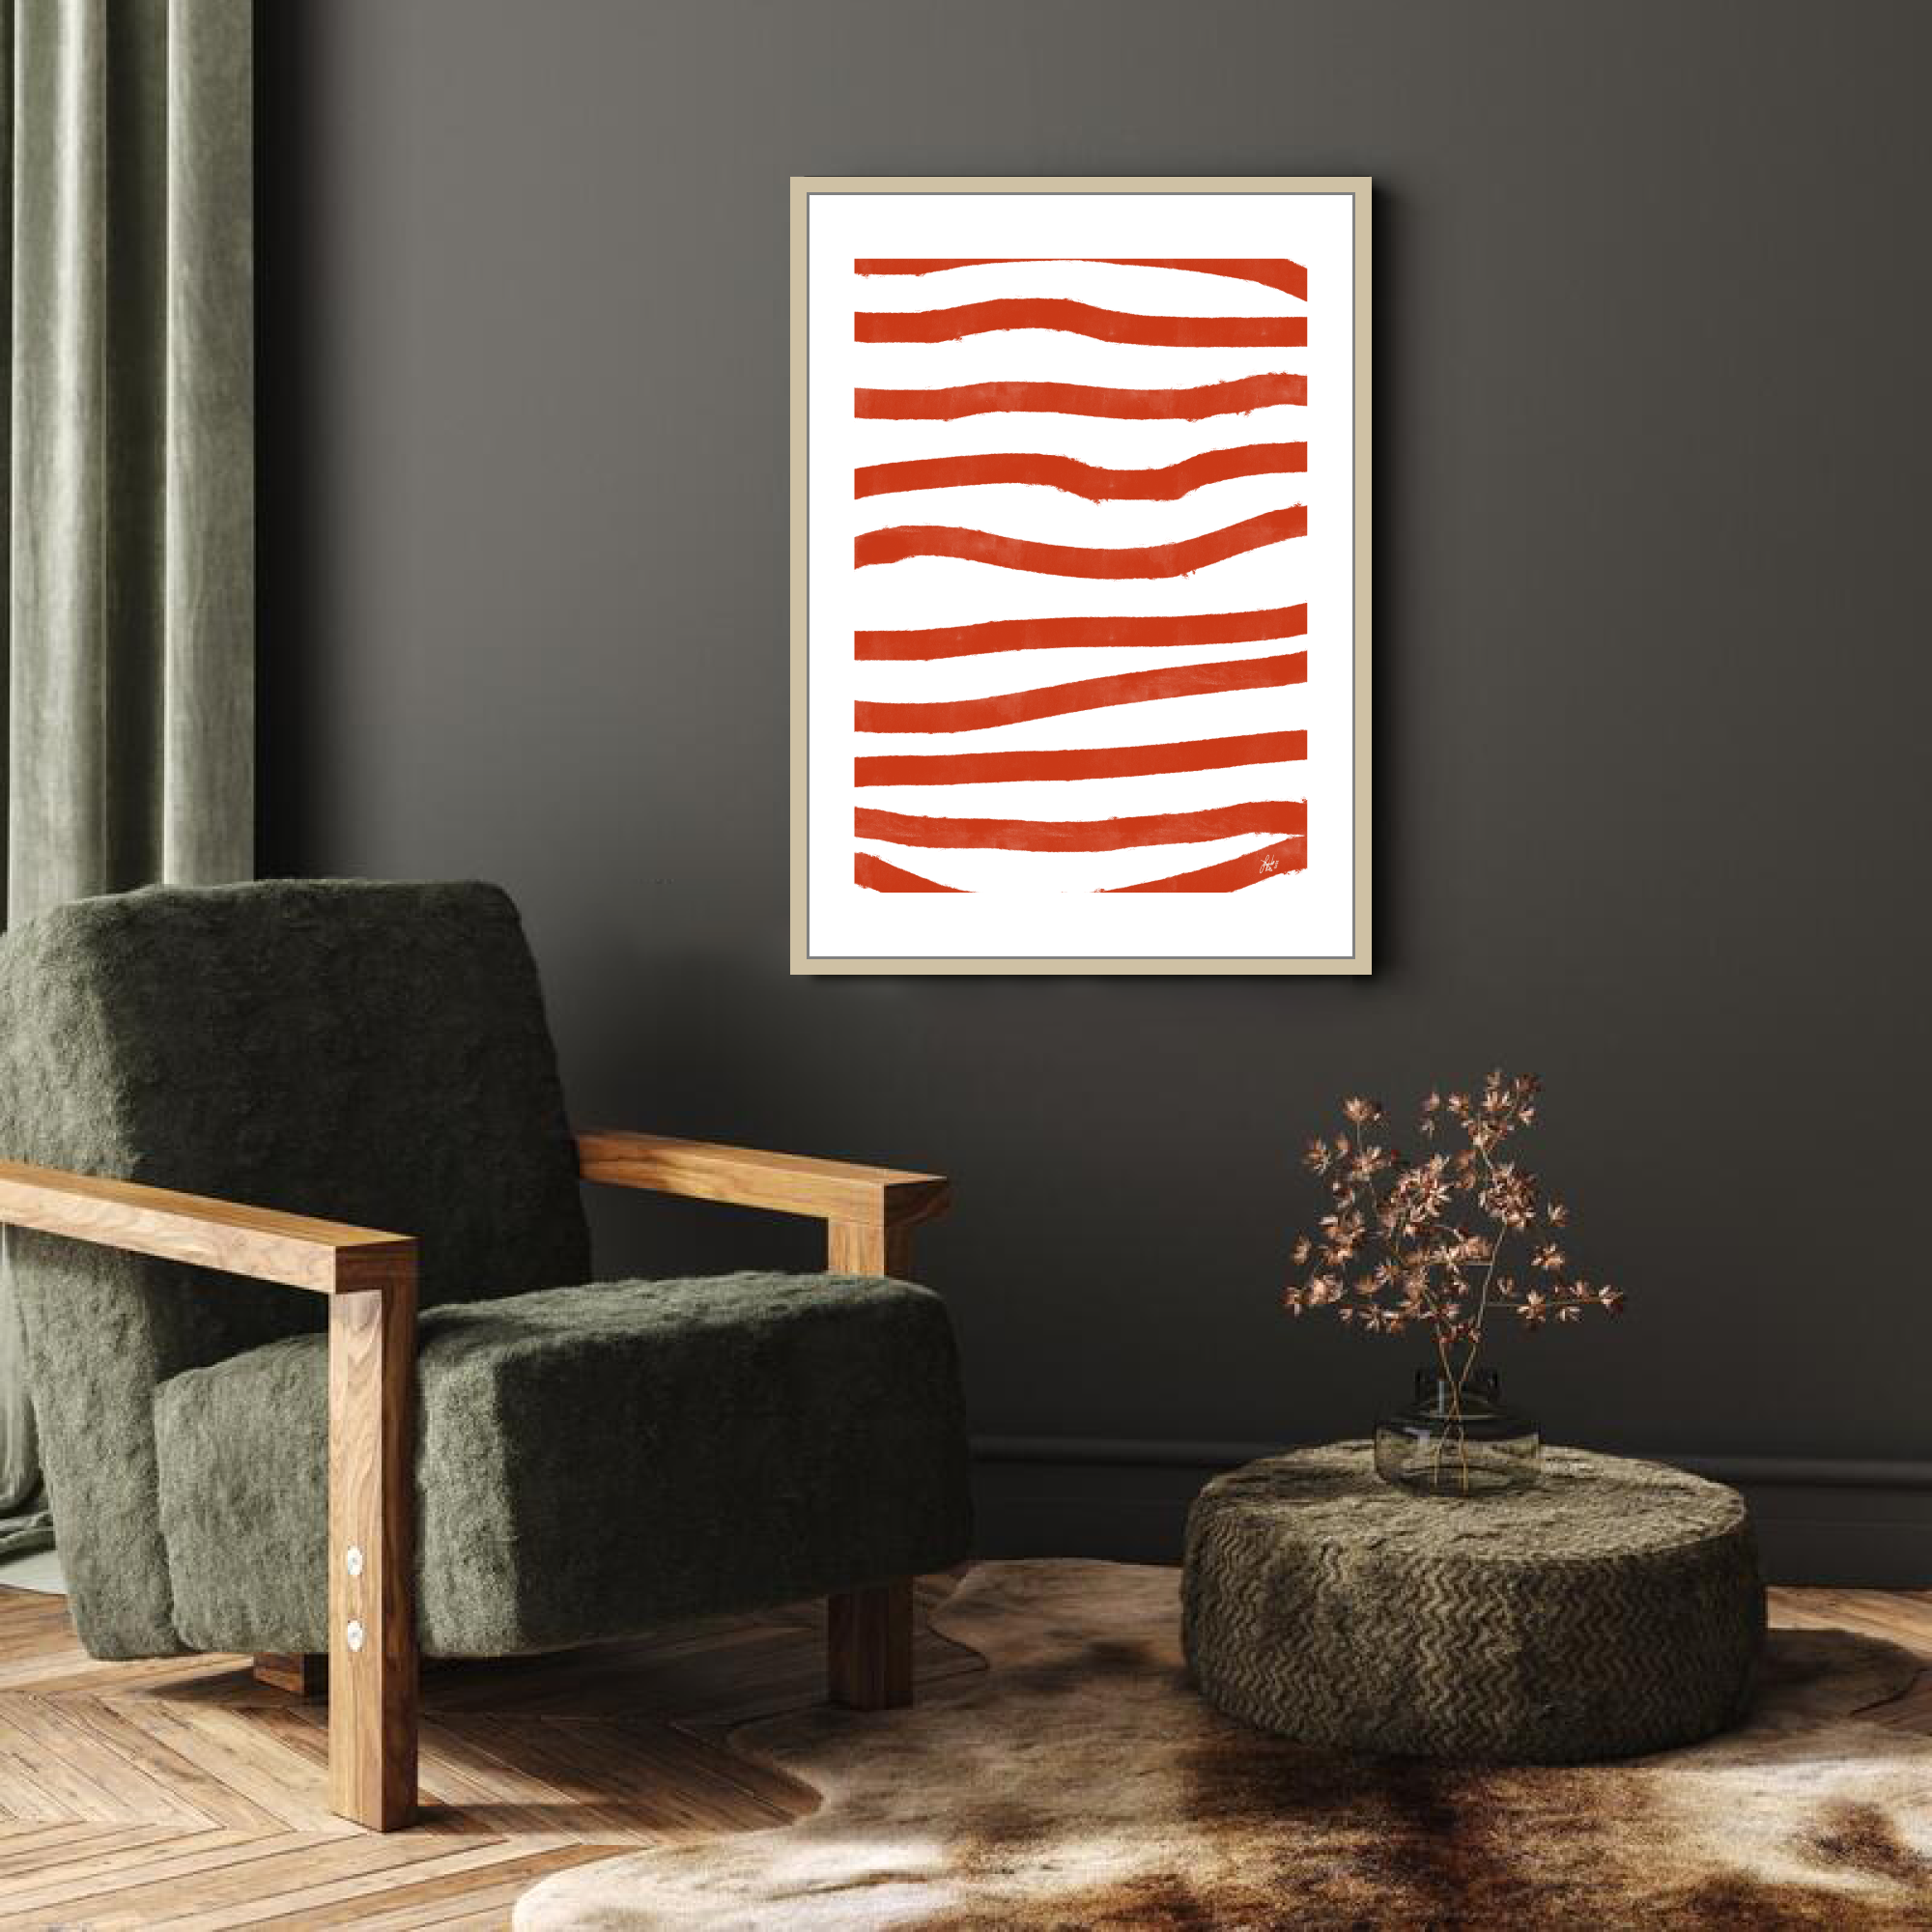 Poster: "Red Stripes"